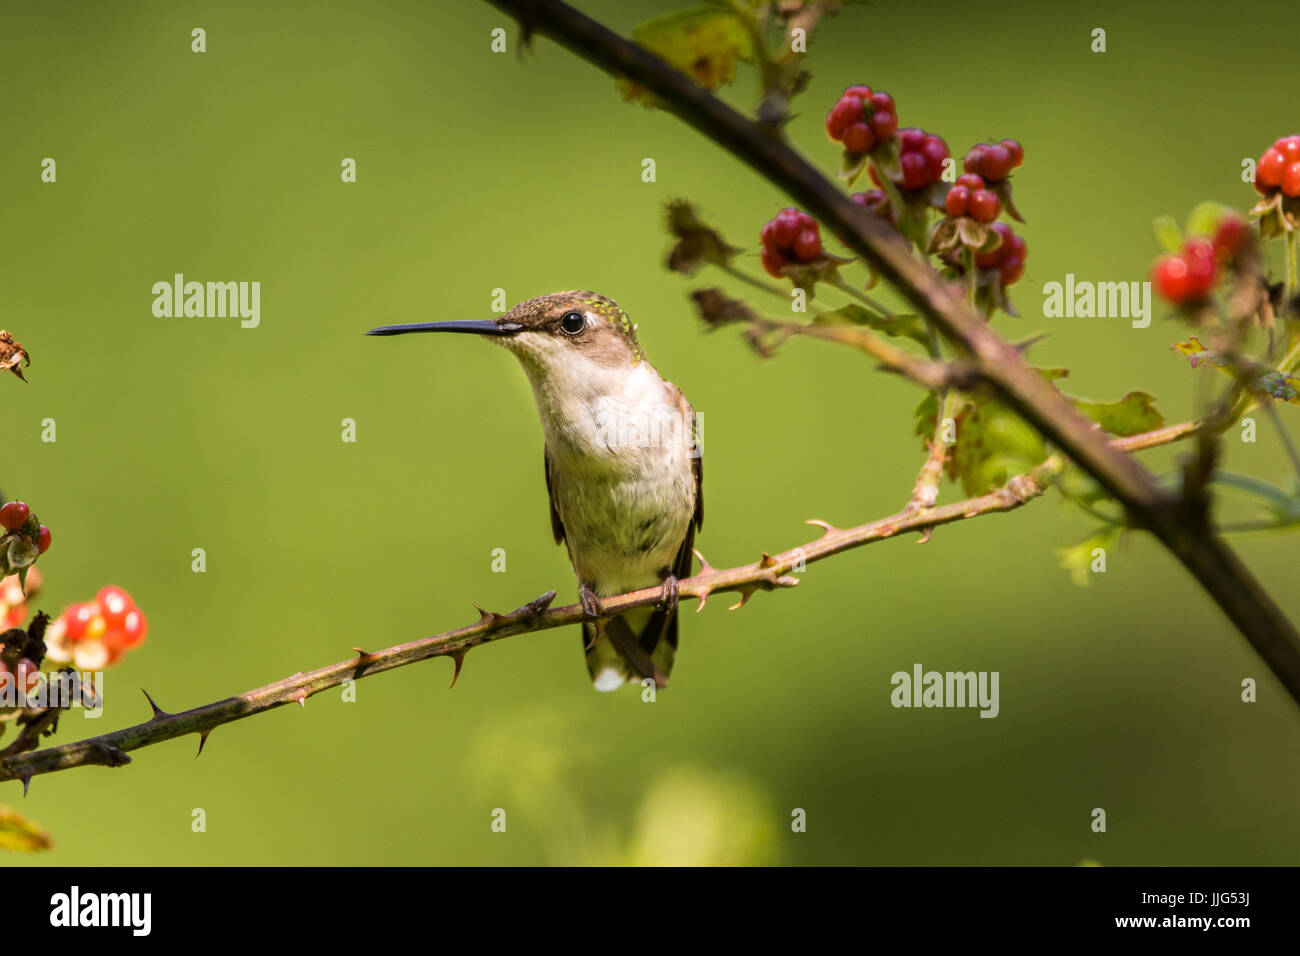 A female ruby-throated hummingbird rests on the stem of a blackberry bush. Stock Photo